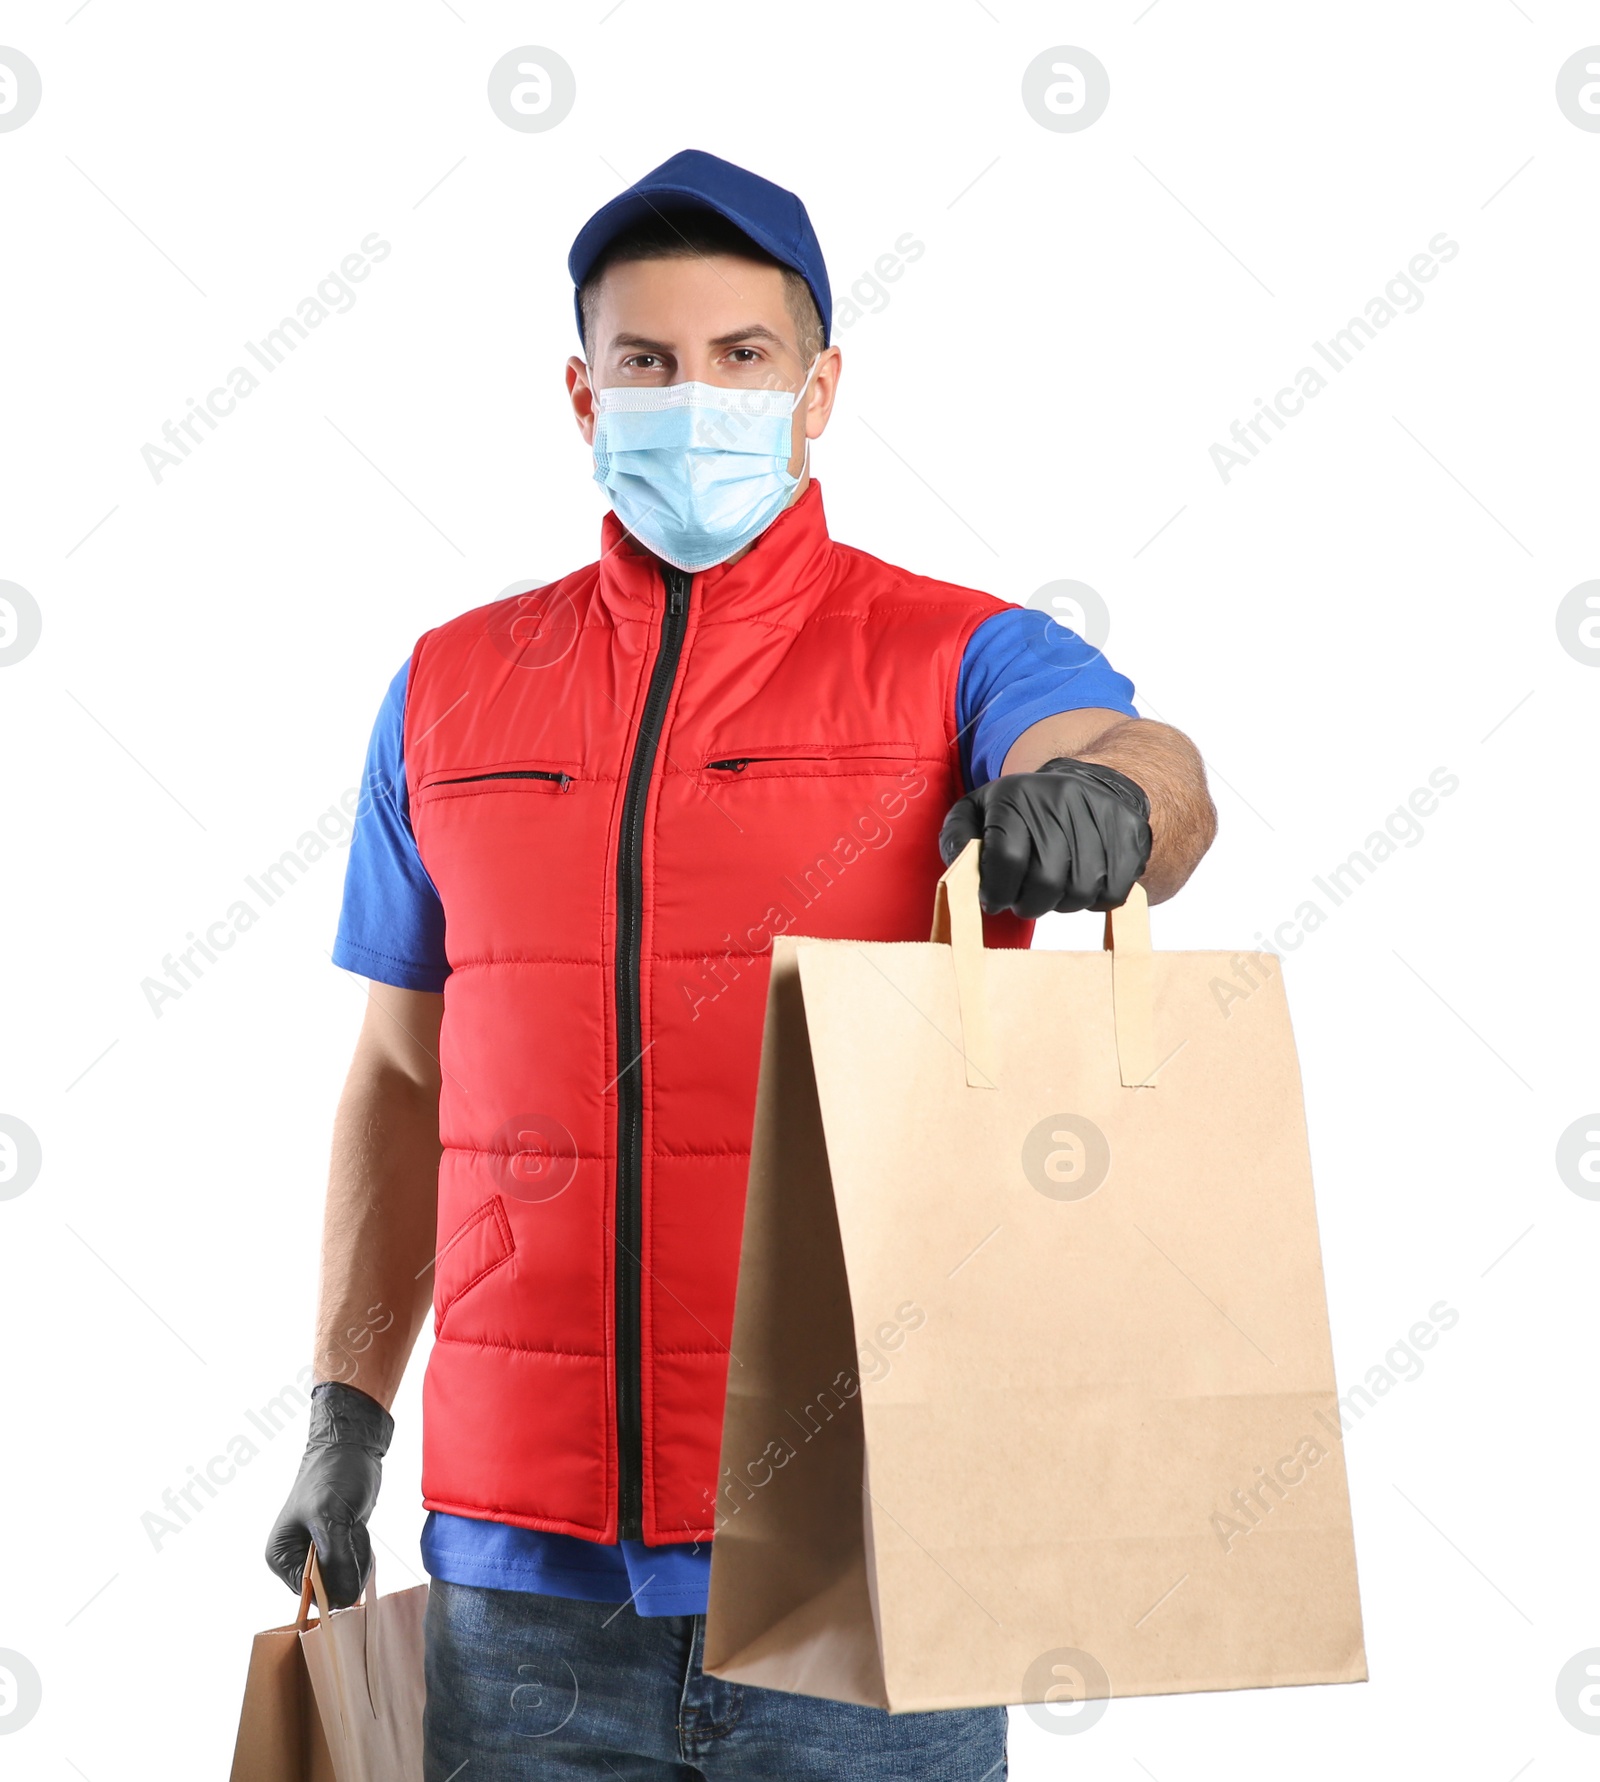 Photo of Courier in medical mask holding paper bags with takeaway food on white background. Delivery service during quarantine due to Covid-19 outbreak